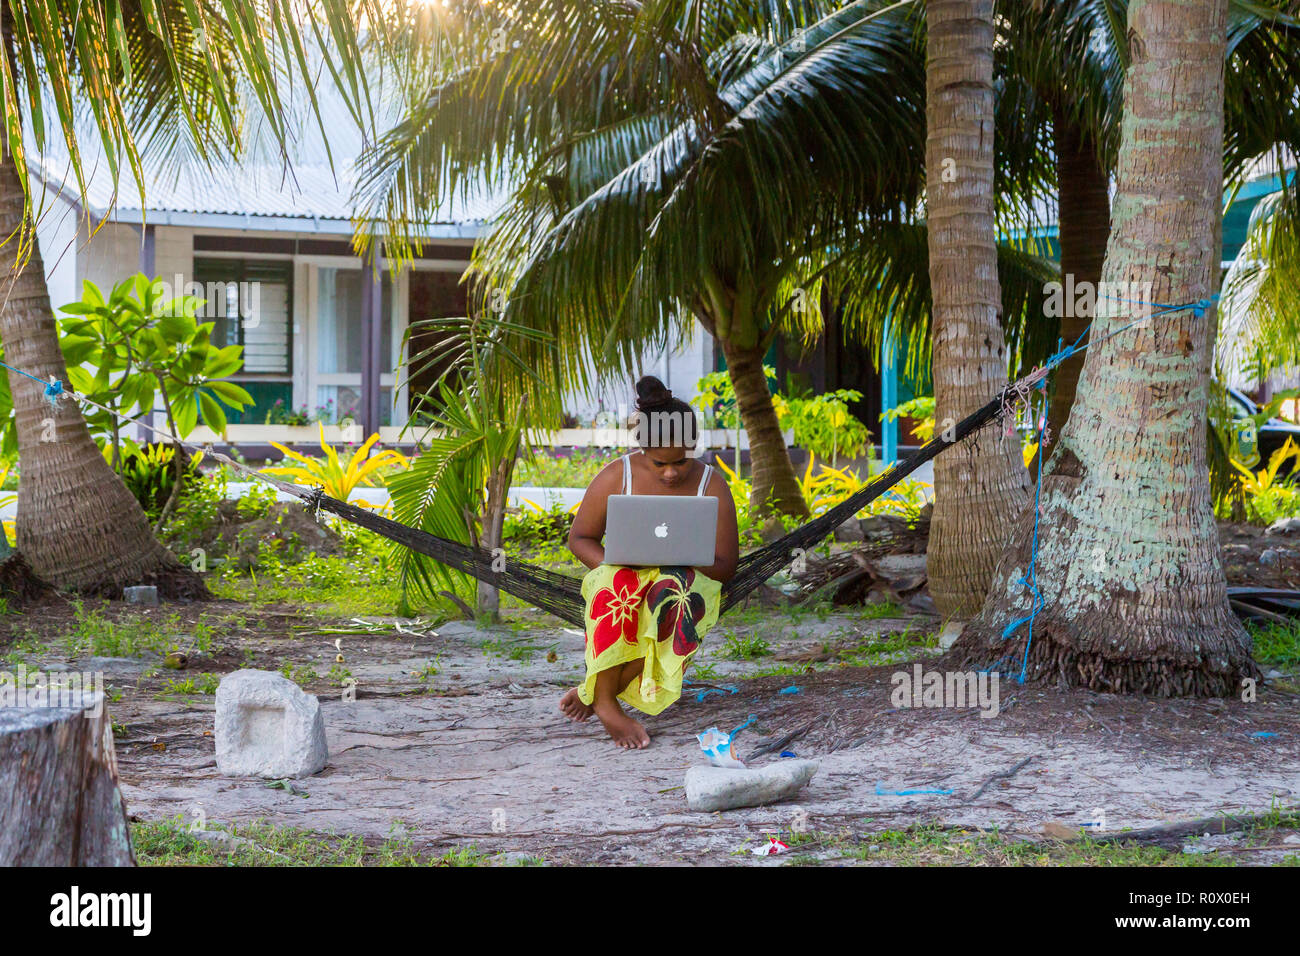 Vaiaku, Tuvalu - Dec 27, 2014: Young Polynesian woman in a hammock with a notebook working outdoors under palm trees. Tuvalu, Polynesia, South Pacific Stock Photo